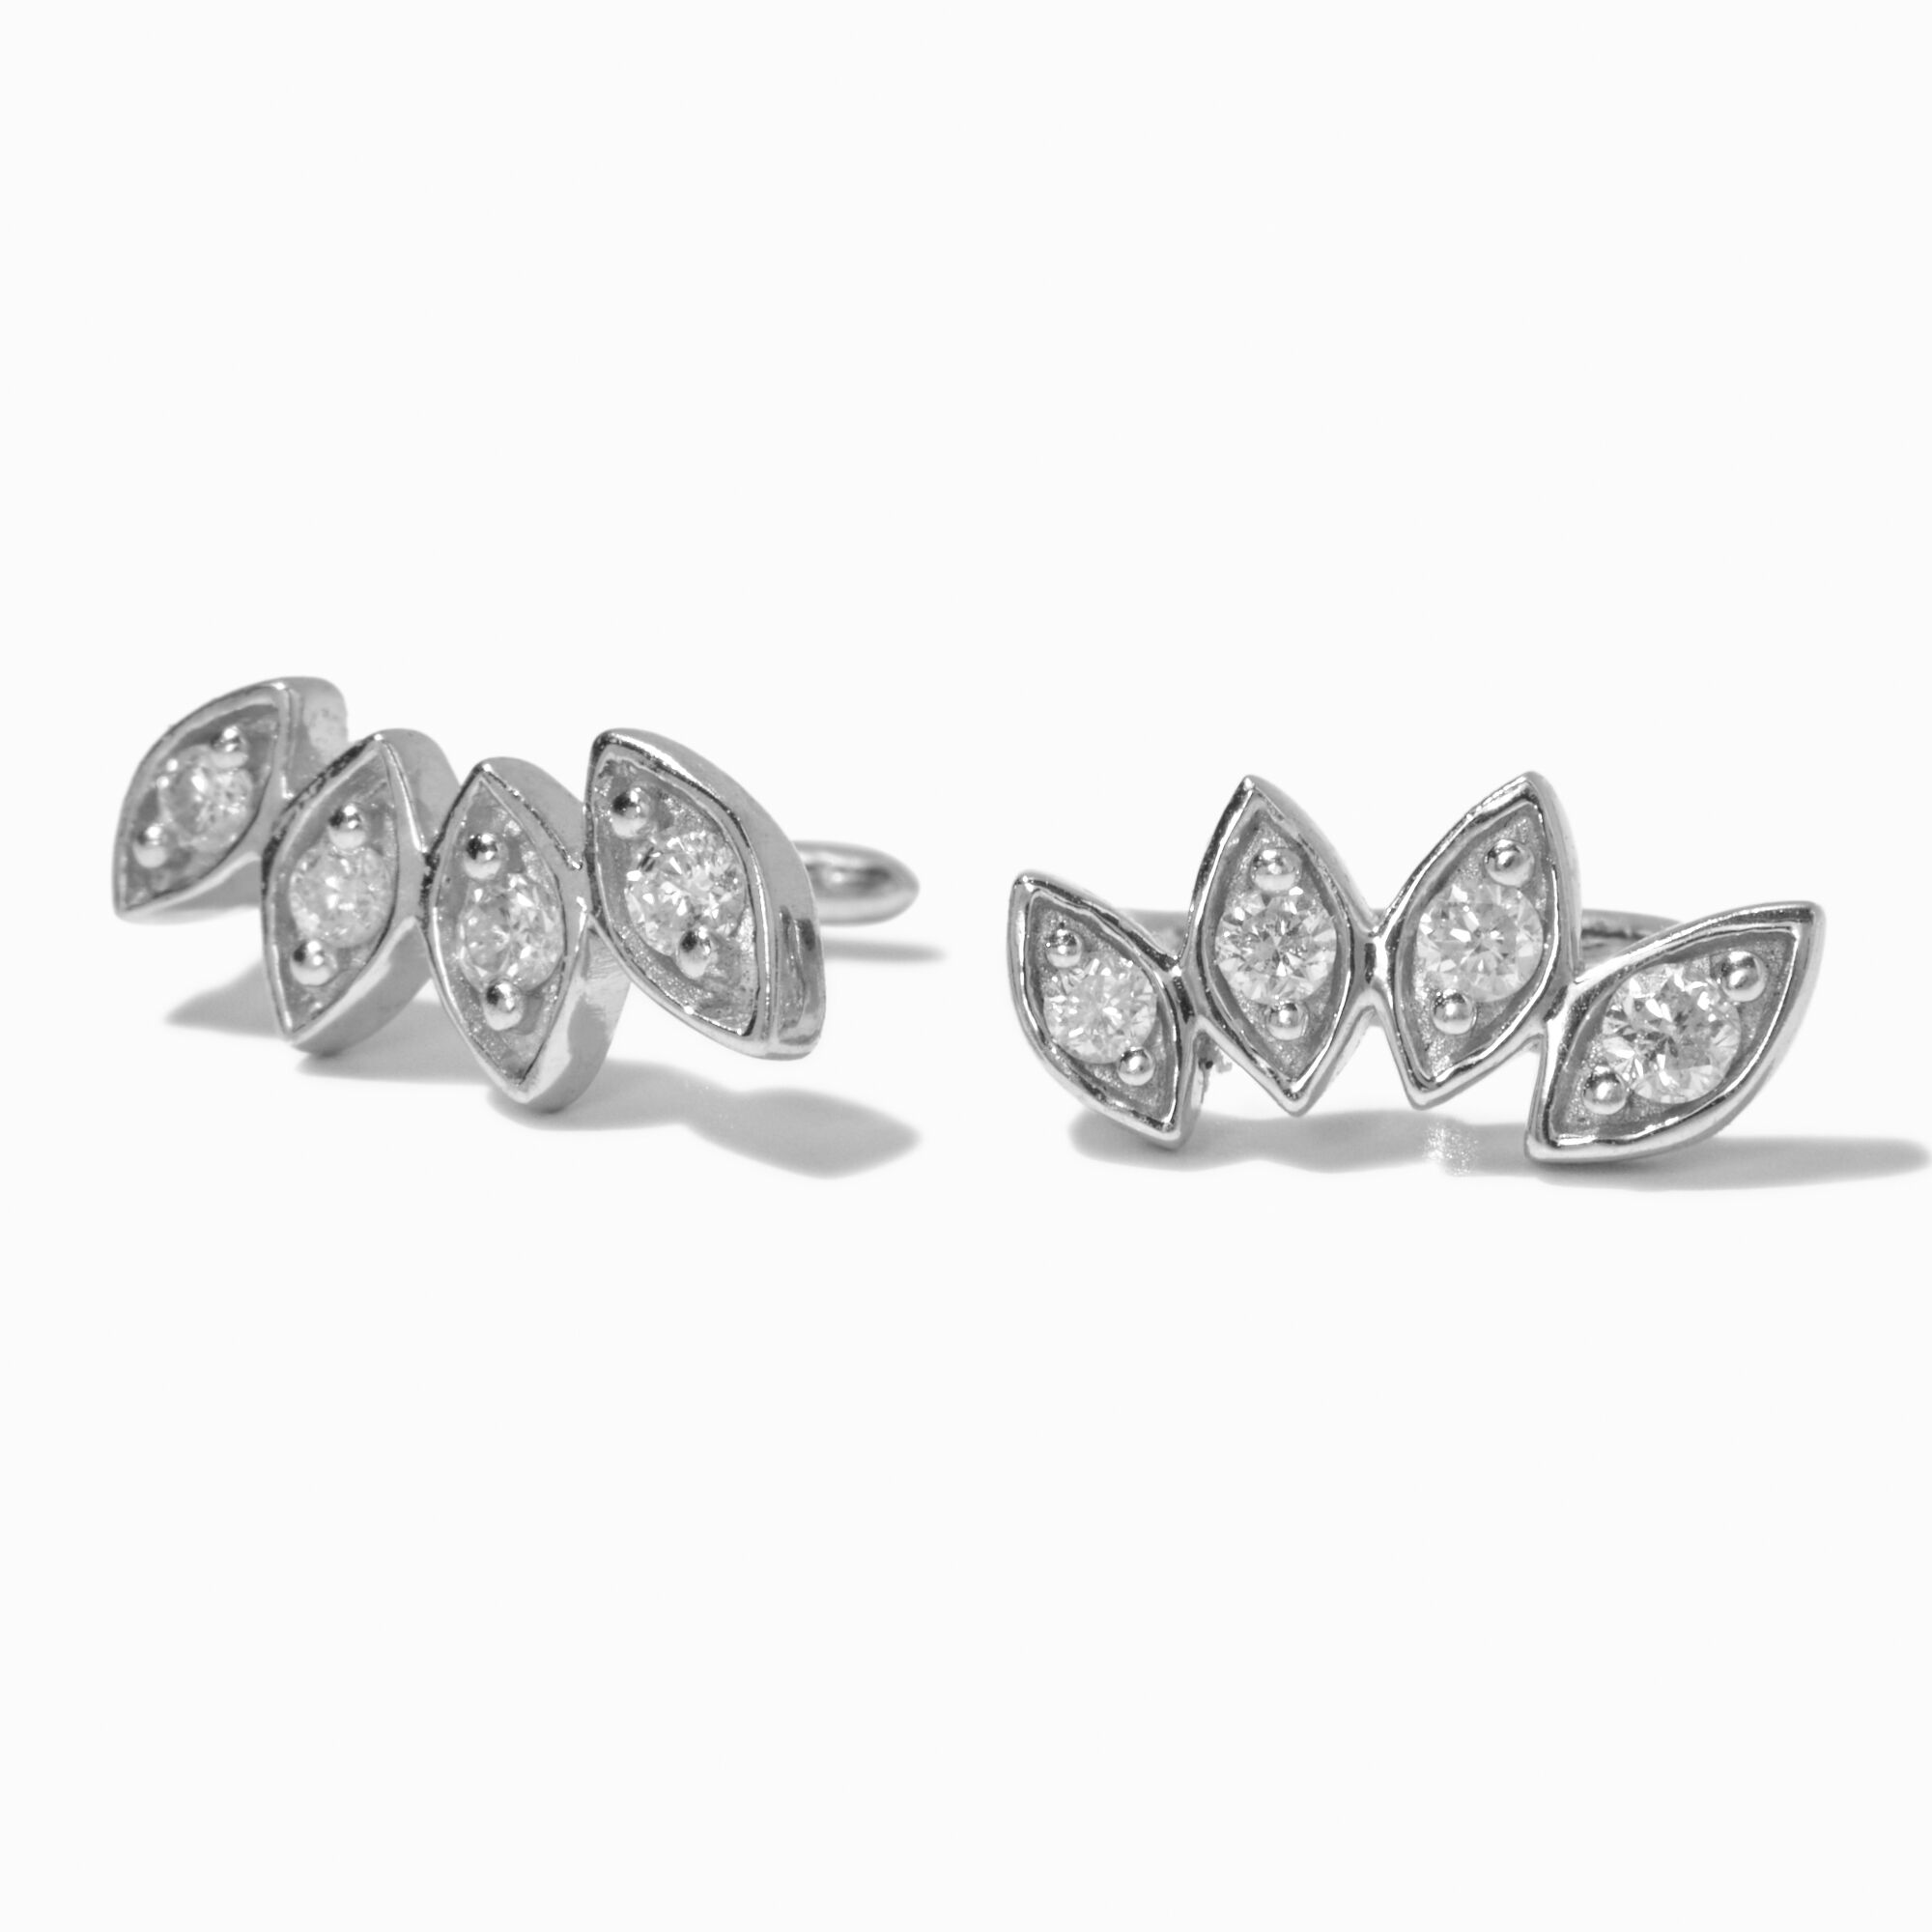 View C Luxe By Claires 120 Ct Tw Laboratory Grown Diamond Crawler Cuff Earrings Silver information